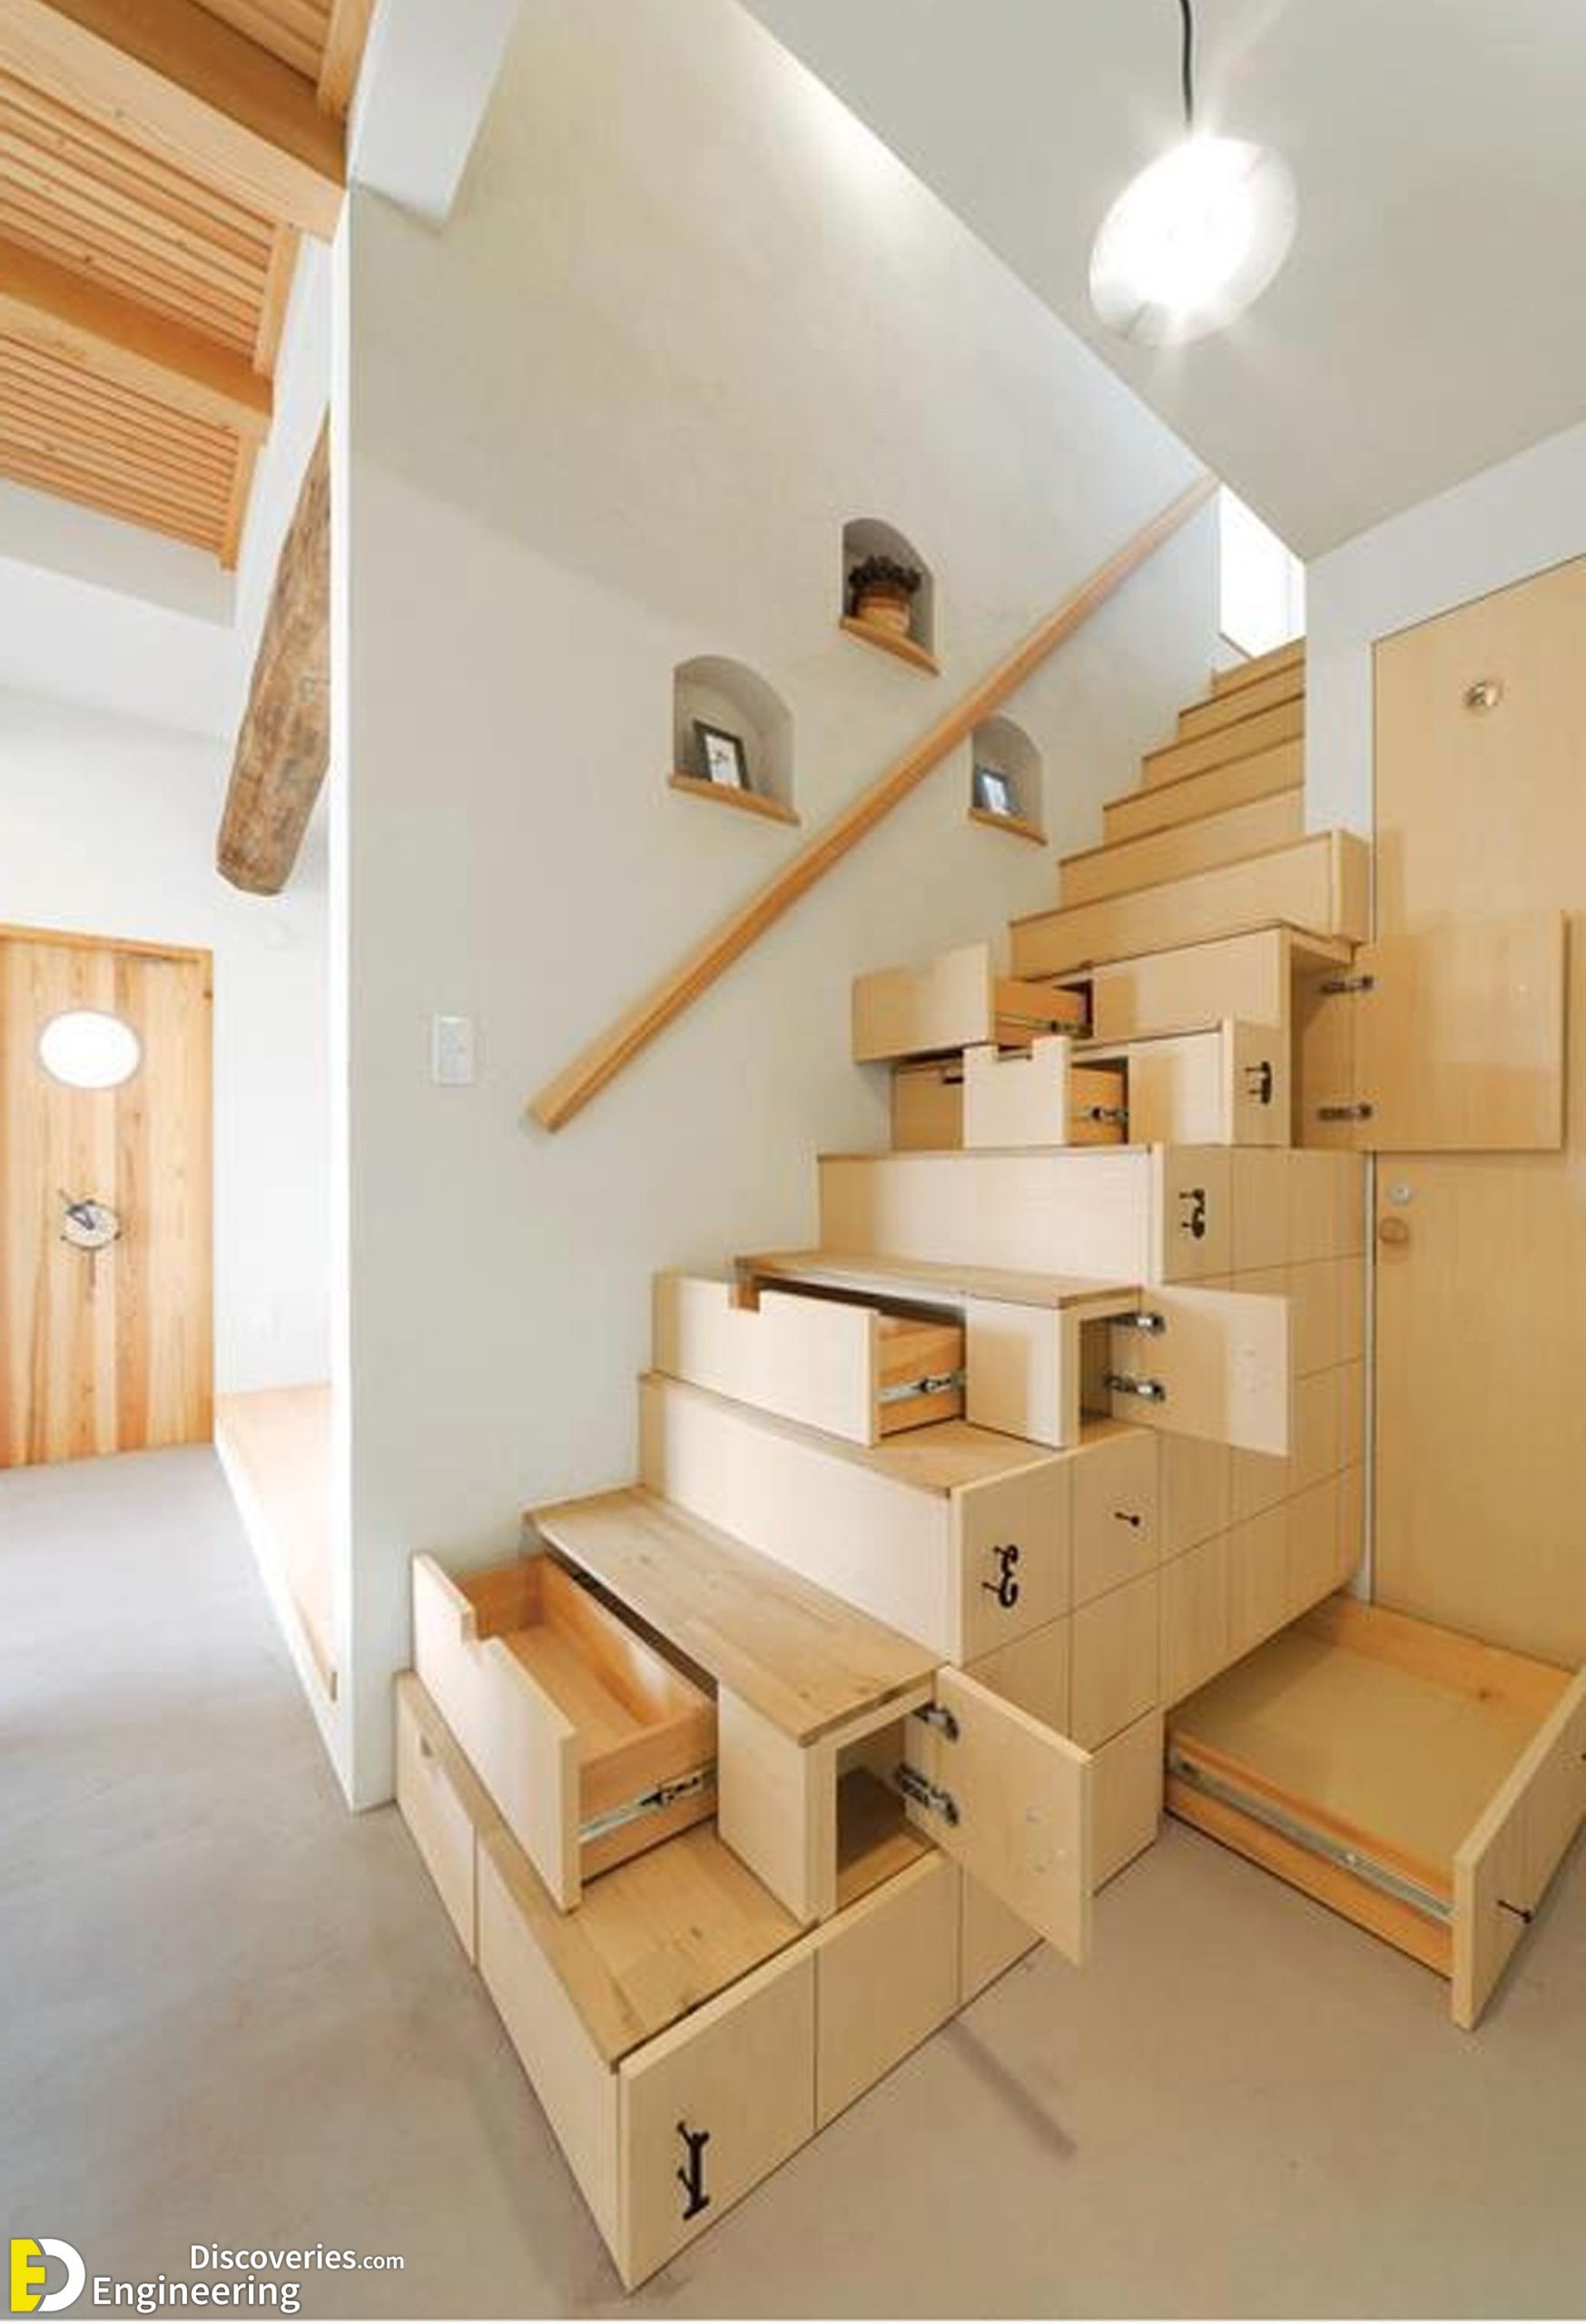 https://engineeringdiscoveries.com/1-engineering-discoveries-maximize-your-space-with-style-36-genius-under-stair-storage-hacks/